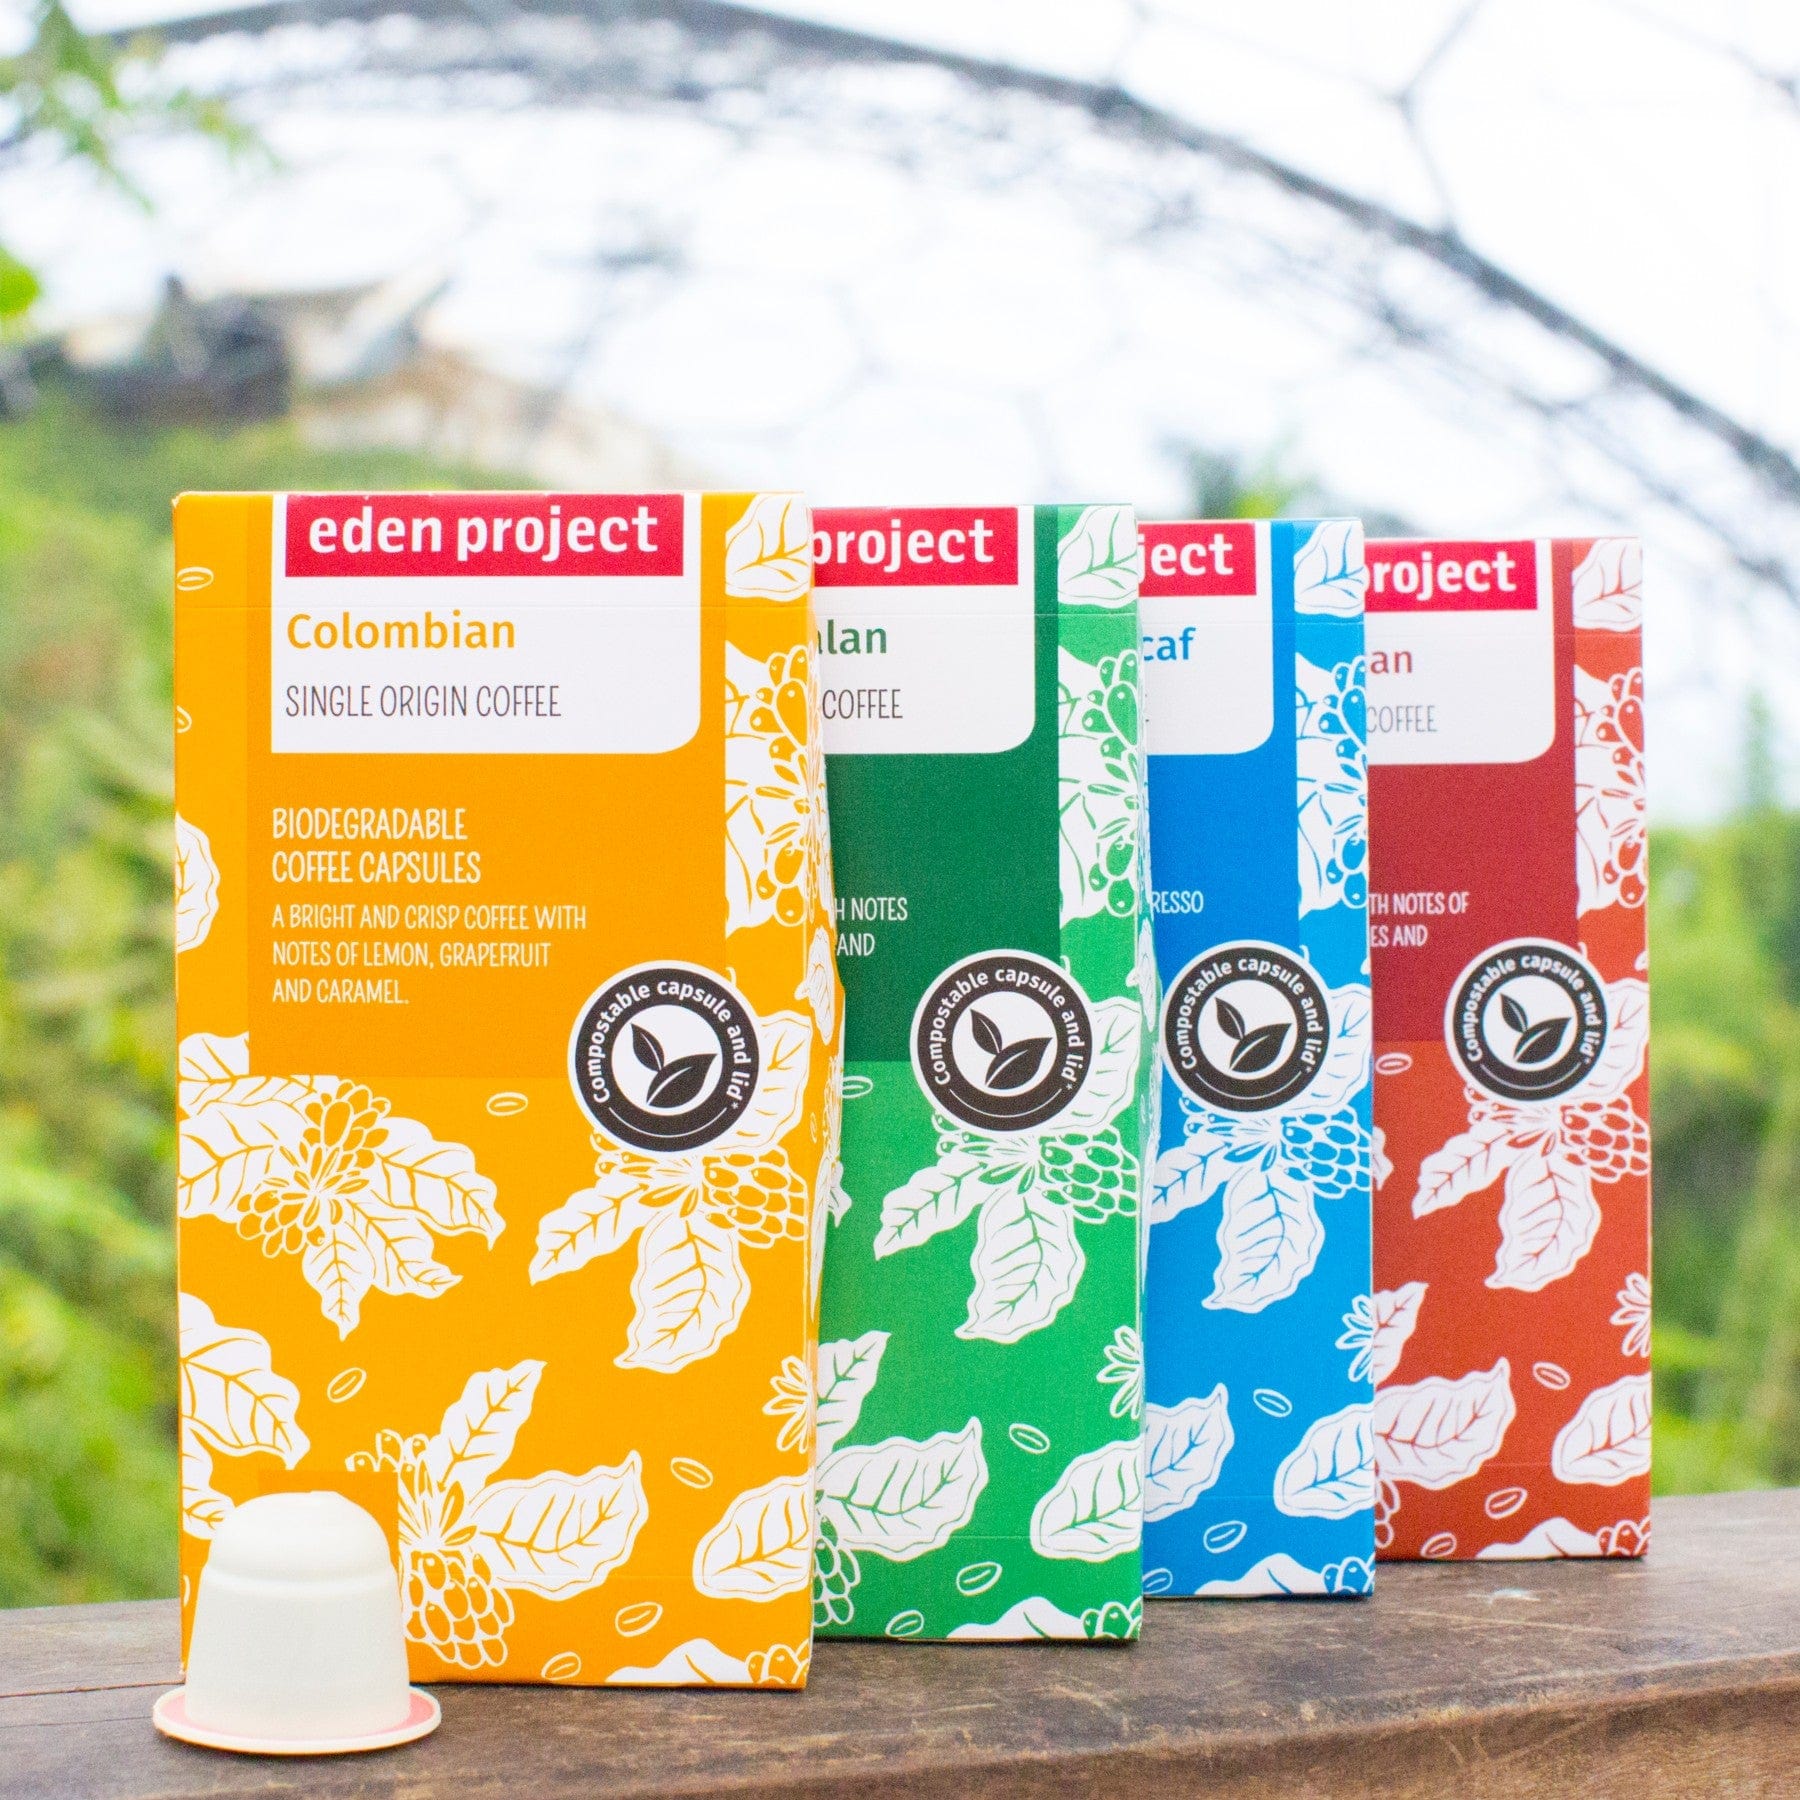 Four colorful Eden Project biodegradable coffee capsules packages of Colombian, Italian, Decaf, and Lungo varieties displayed outdoors with a natural blurry background and a coffee pod in front.